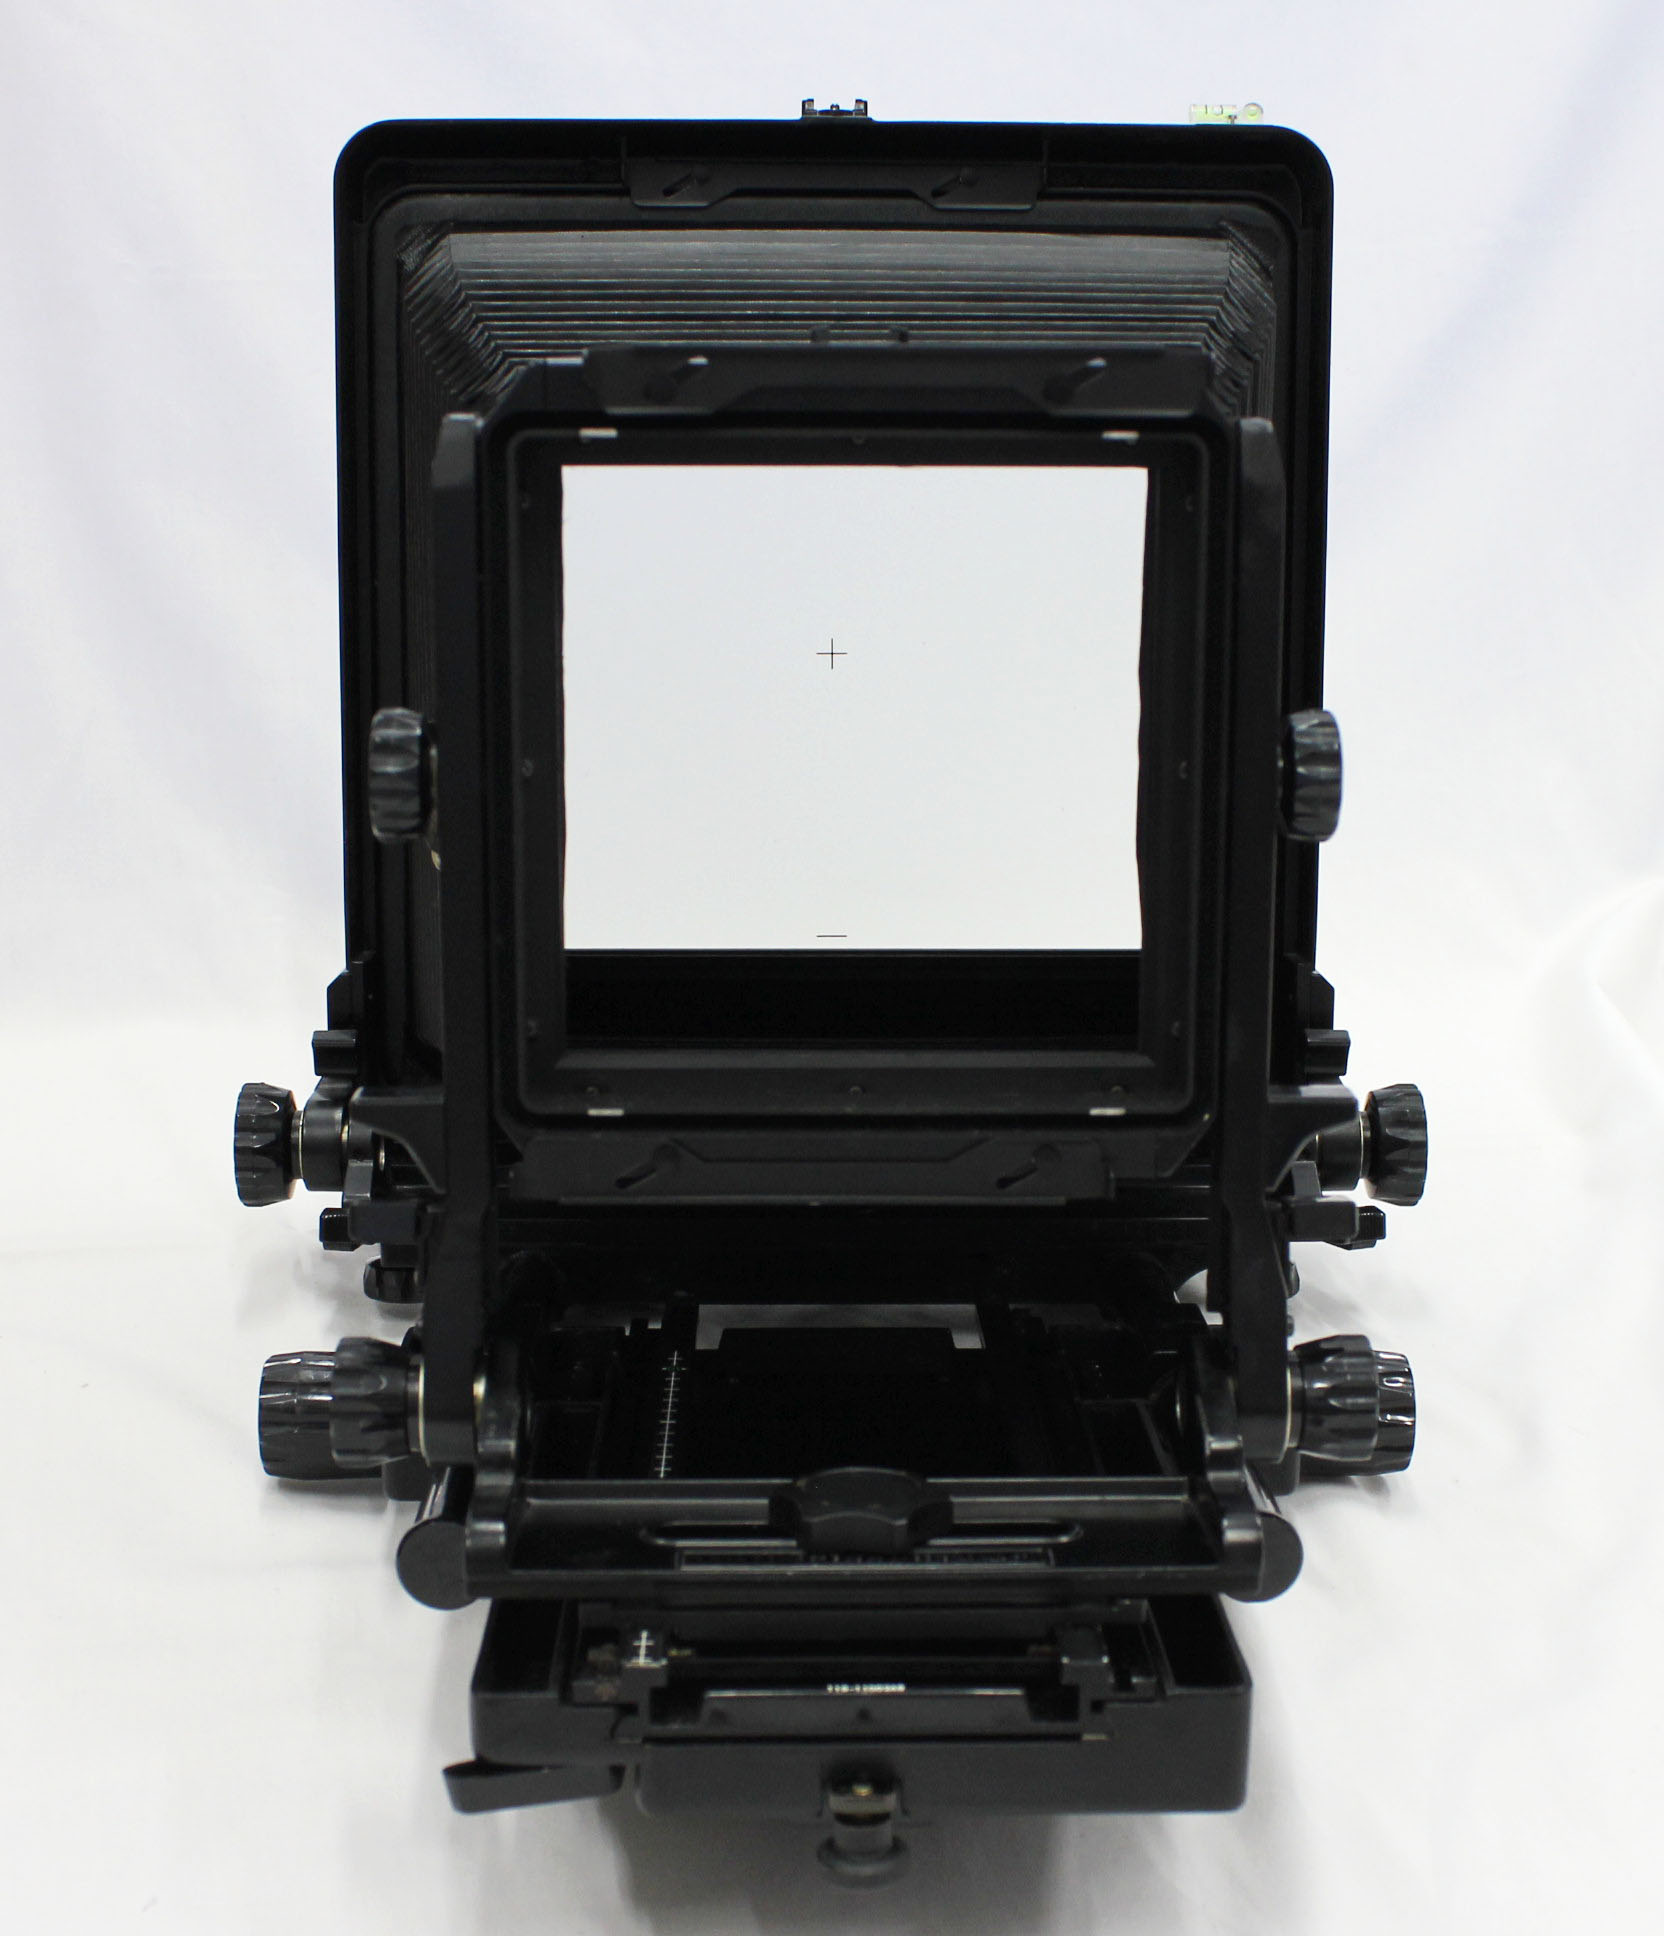 Toyo Field 810M II 8x10 Large Format Camera with Linhof Board Adapter in Toyo Case from Japan Photo 8